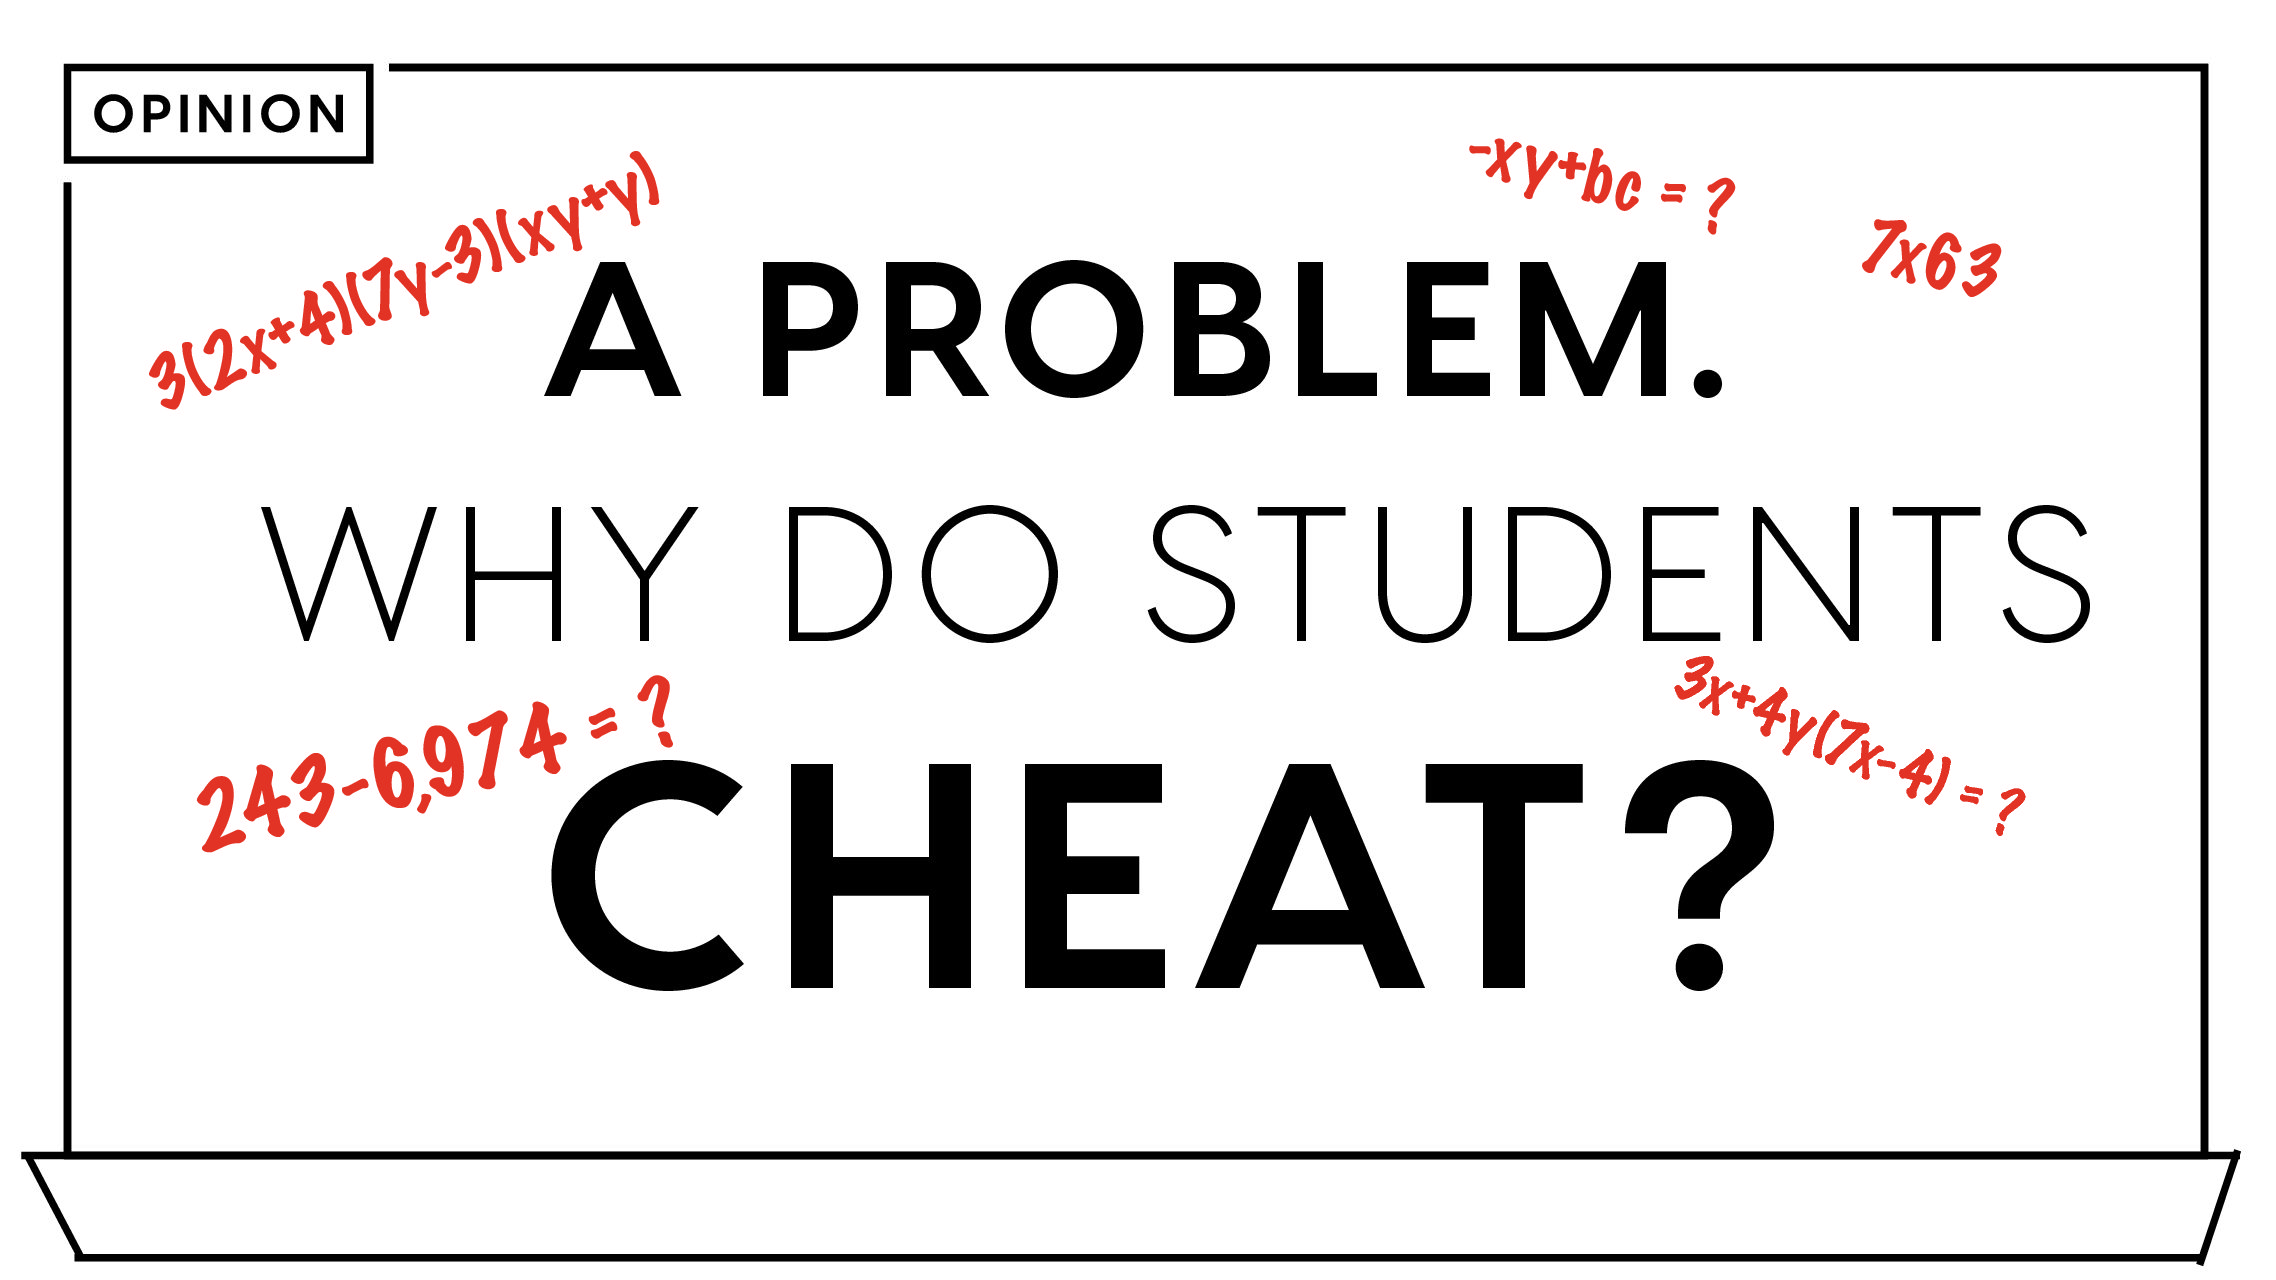 Cheating has overtaken East classes. Here's why it needs to stop.